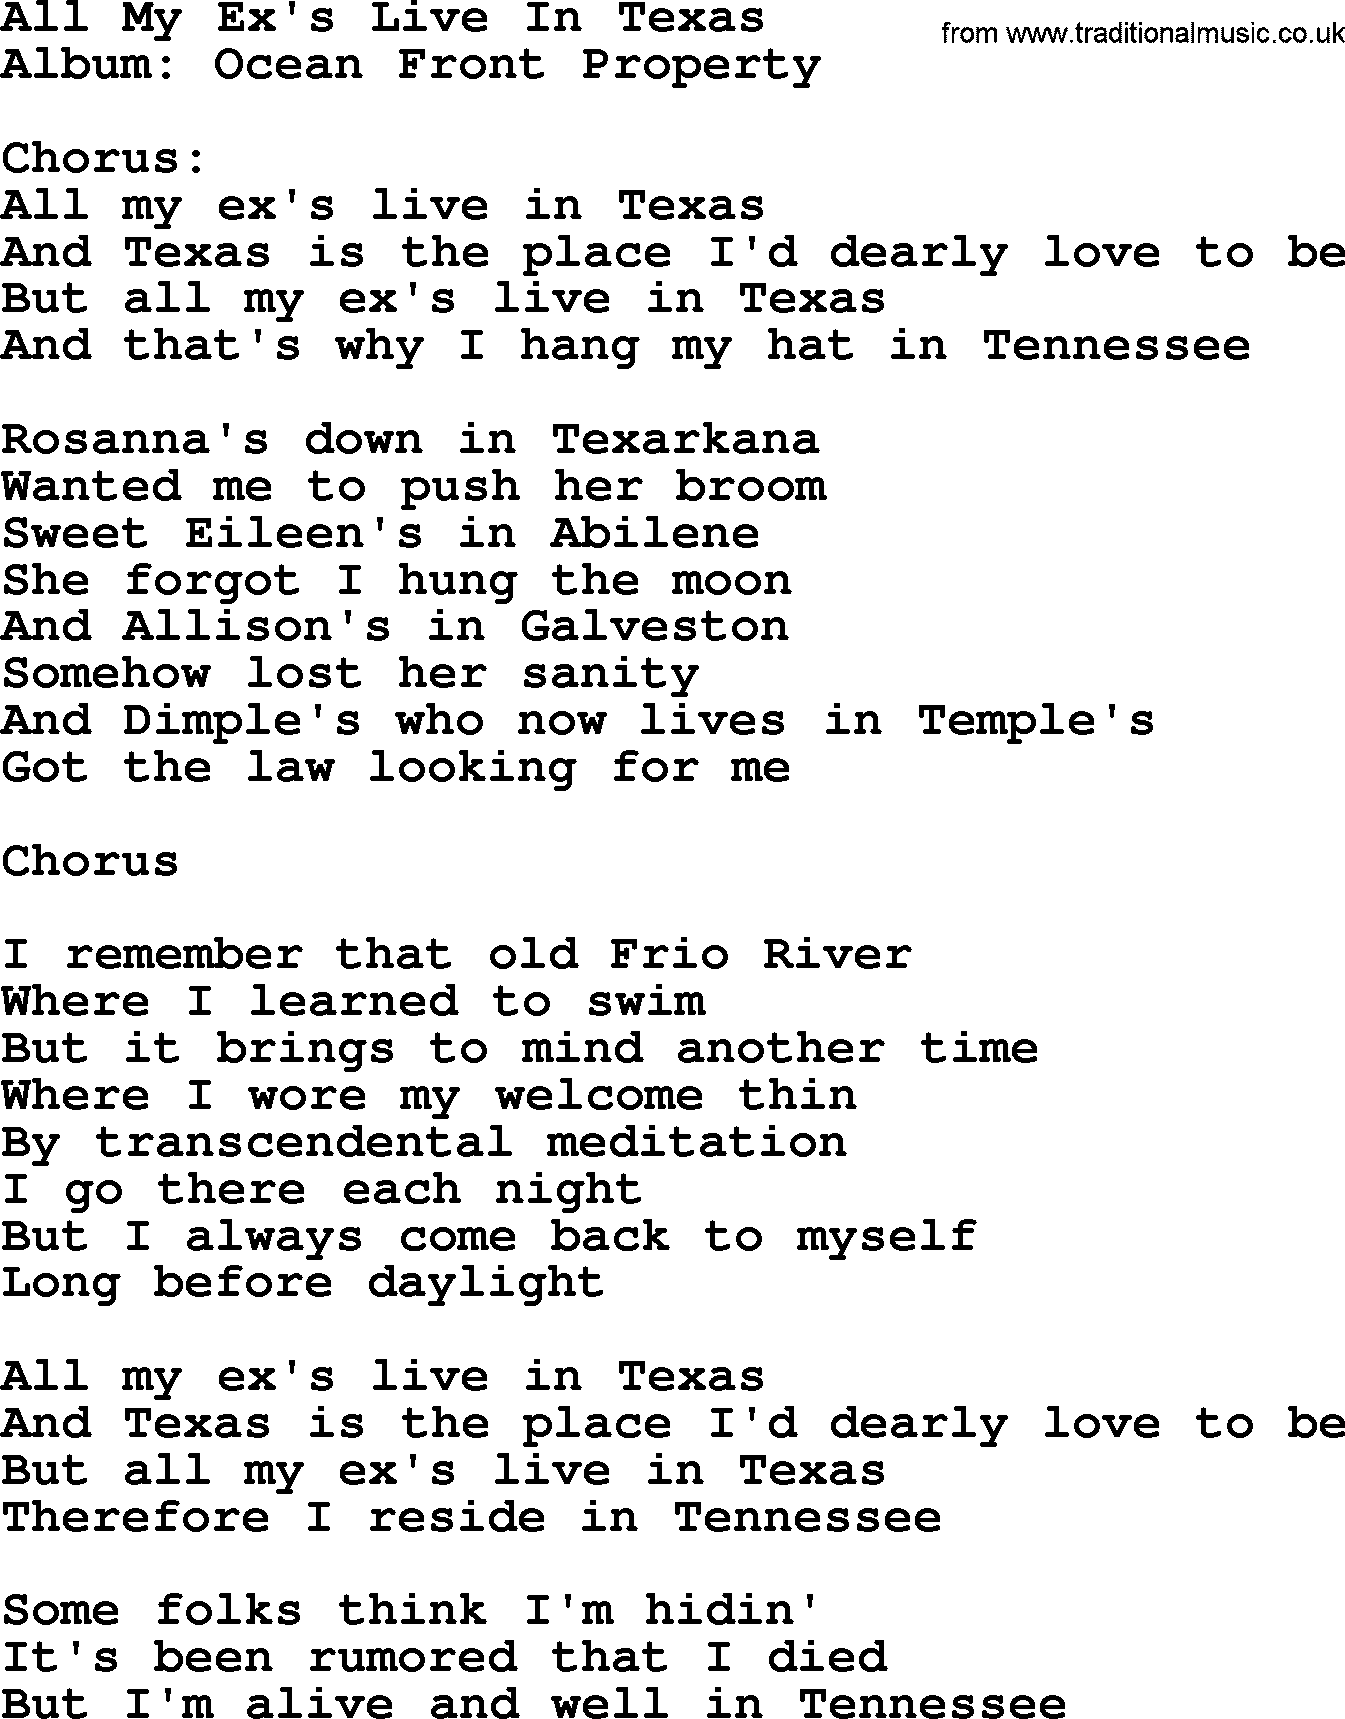 George Strait song: All My Ex's Live In Texas, lyrics